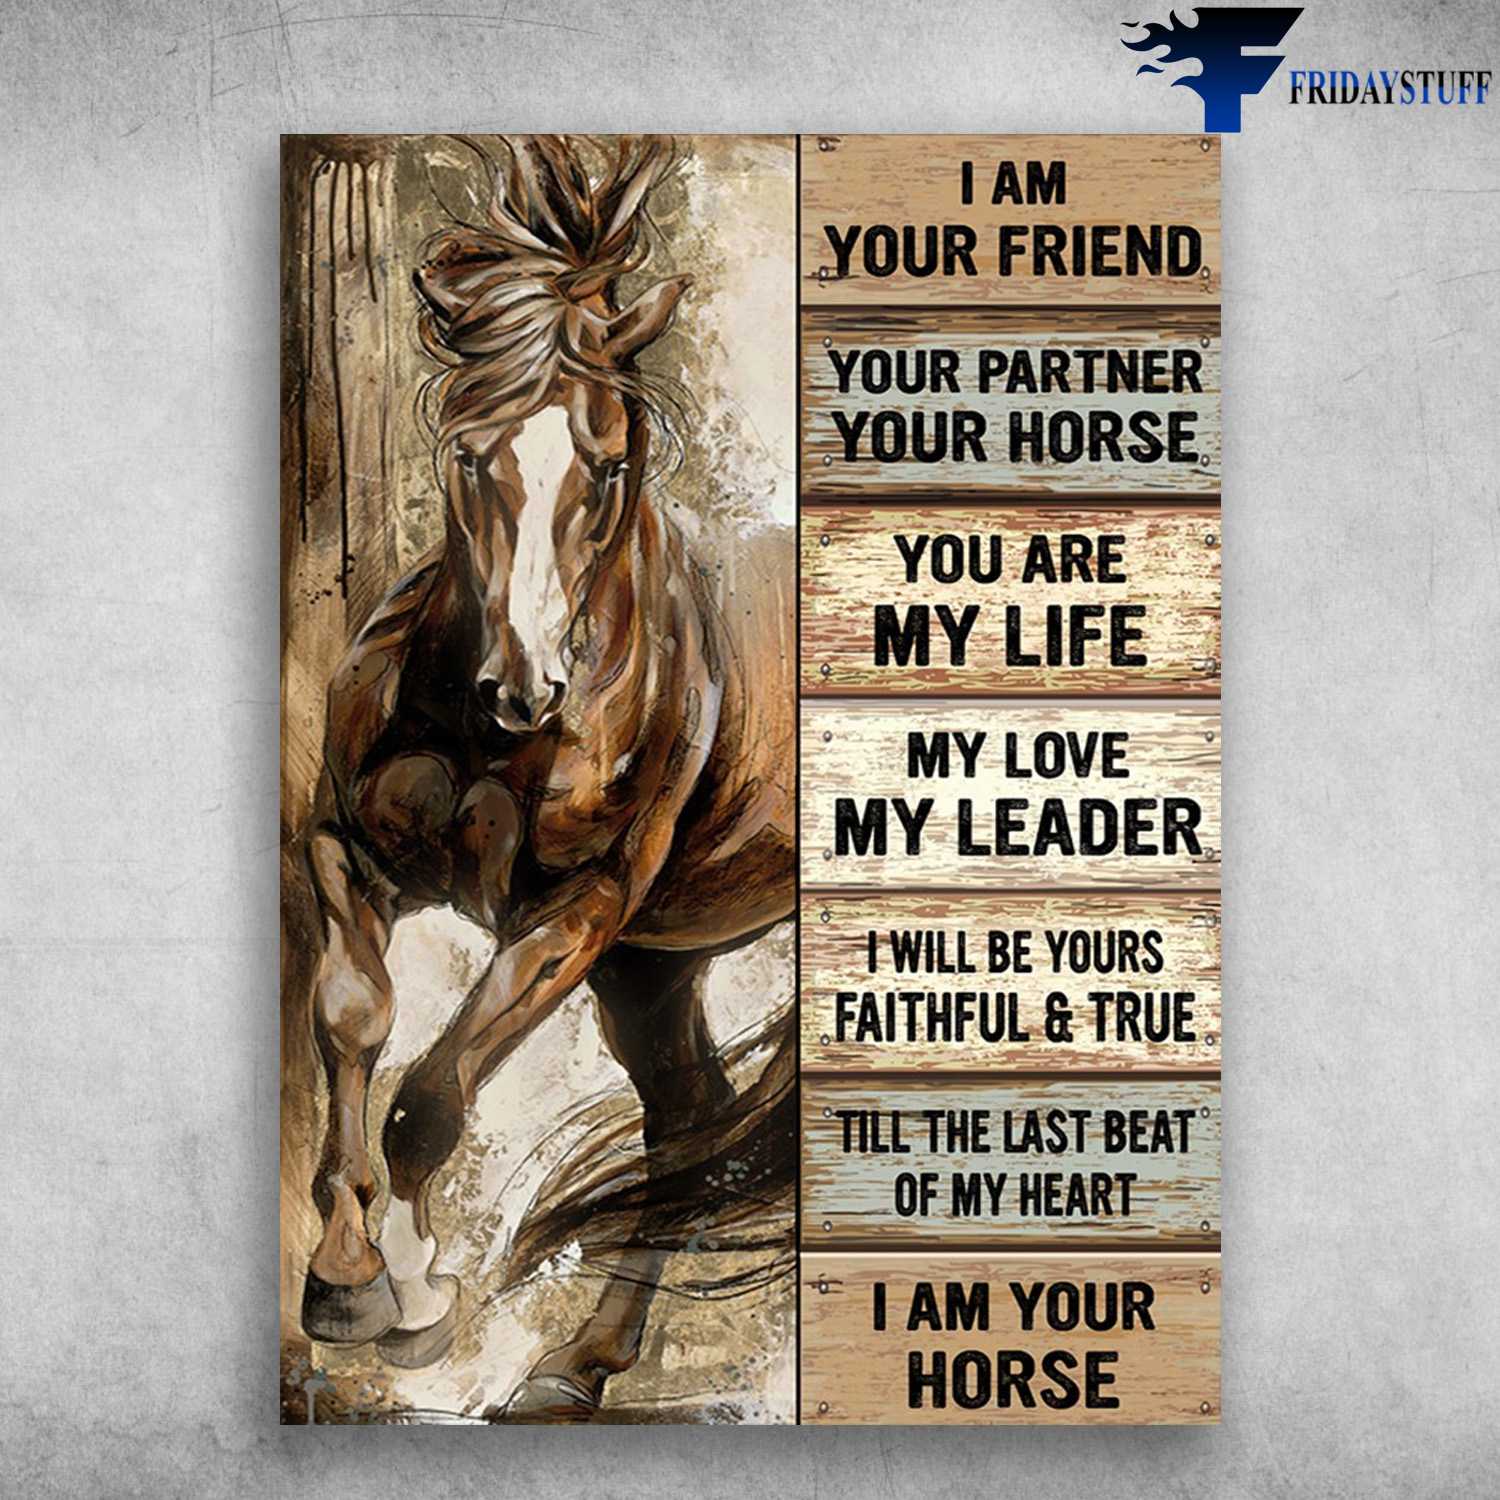 Horse Poster - I Am Your Friend, Your Partner, You Horse, You Are My Life, My Love, My Leader, I Will Be Your Faithful And True, Till The Last Beat Of My Heart, I Am Your Horse